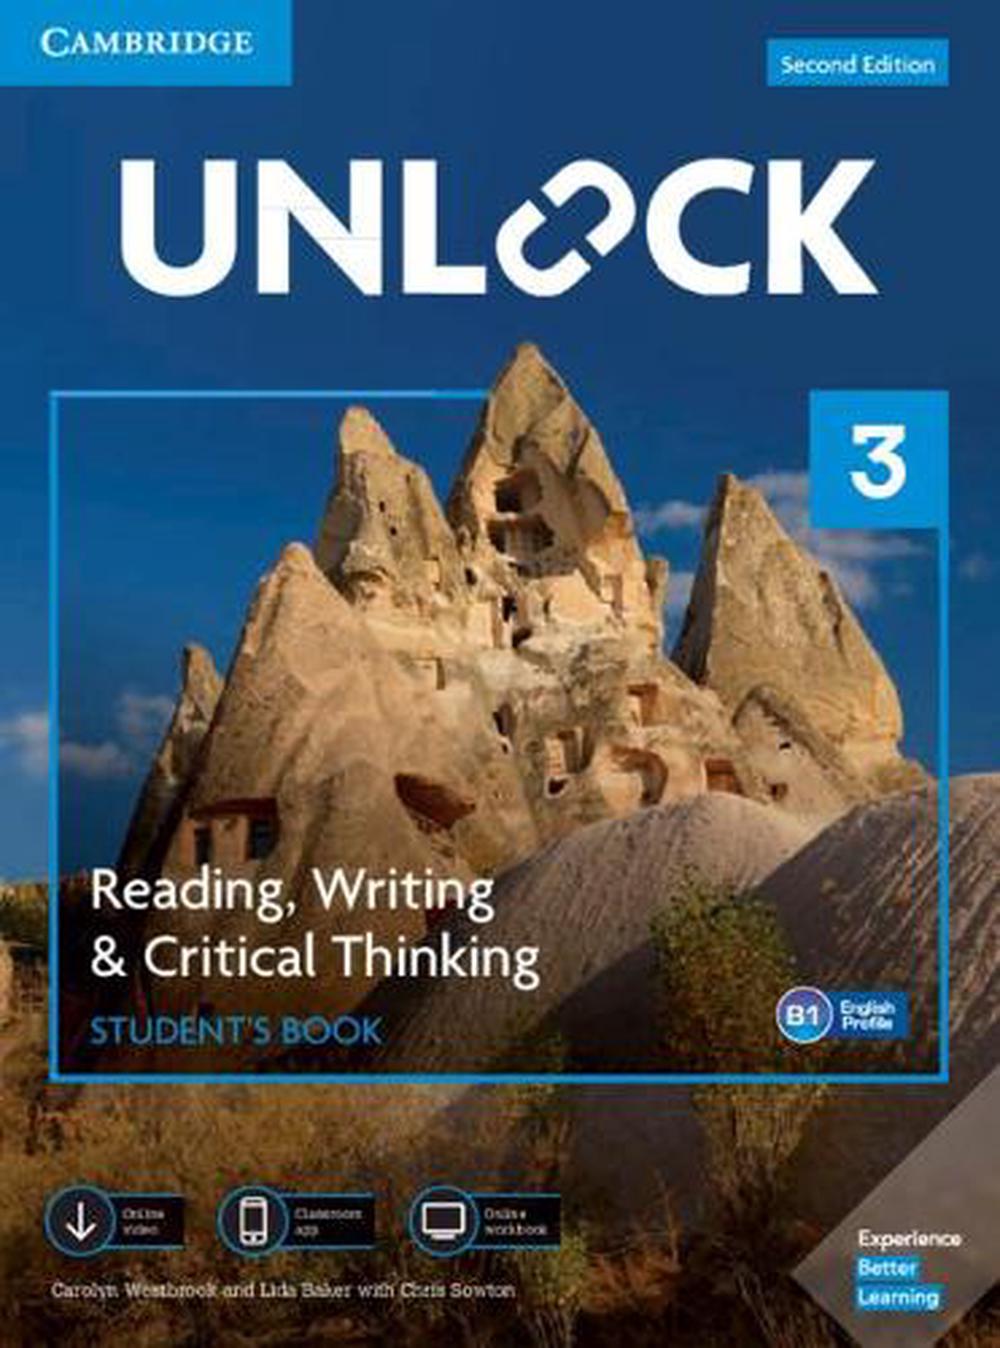 The　Westbrook,　Online　and　Reading,　Writing,　Downloadable　Mob　9781108686013　at　by　Carolyn　Level　Merchandise,　App　online　Thinking　Video　Buy　Student's　Workbook　Book　Critical　W/　Book,　Unlock　Nile